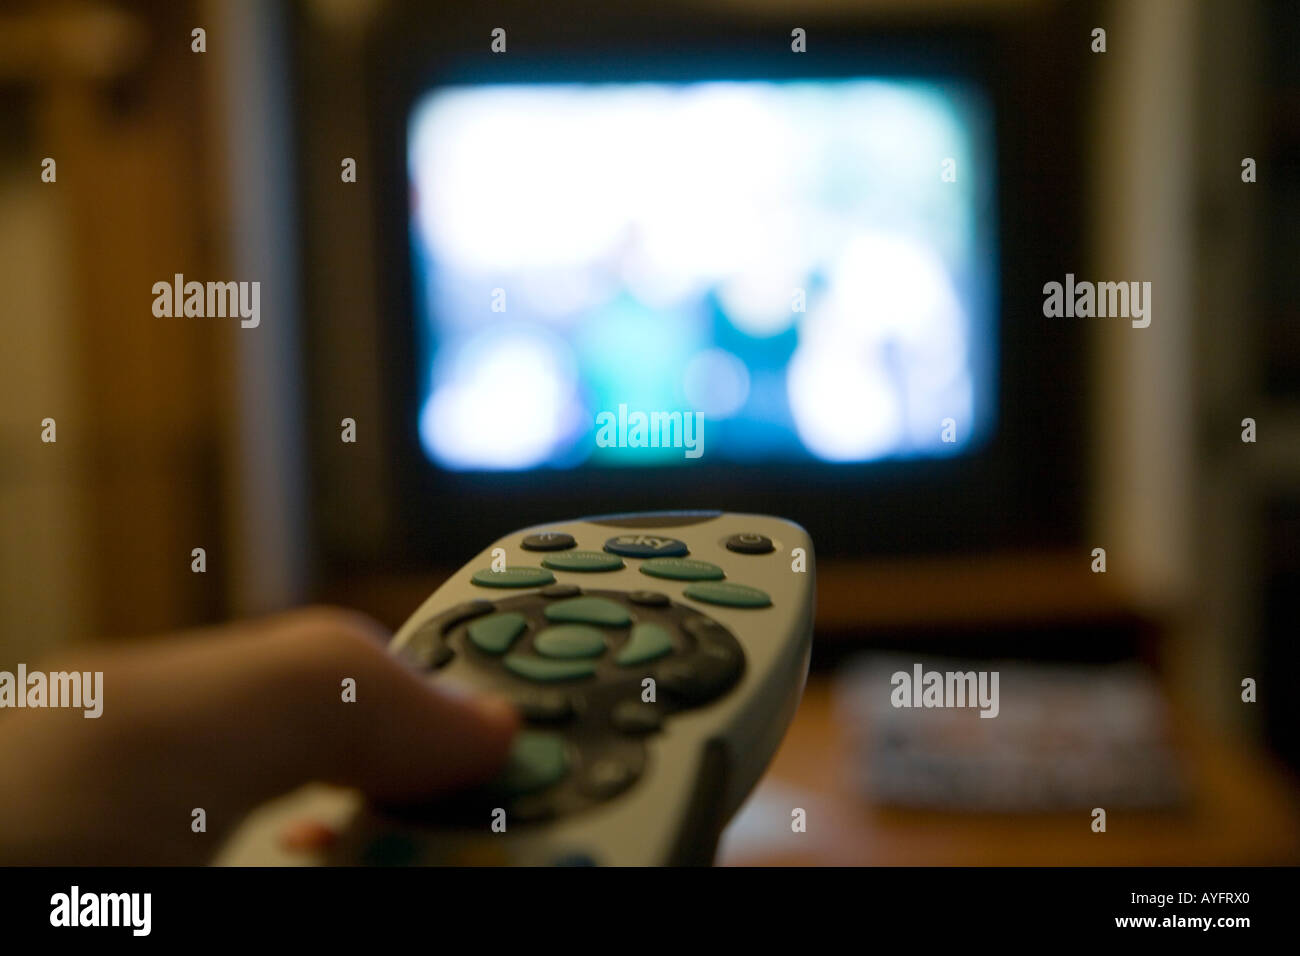 Man's left hand operating Sky remote control with television set in the background Stock Photo